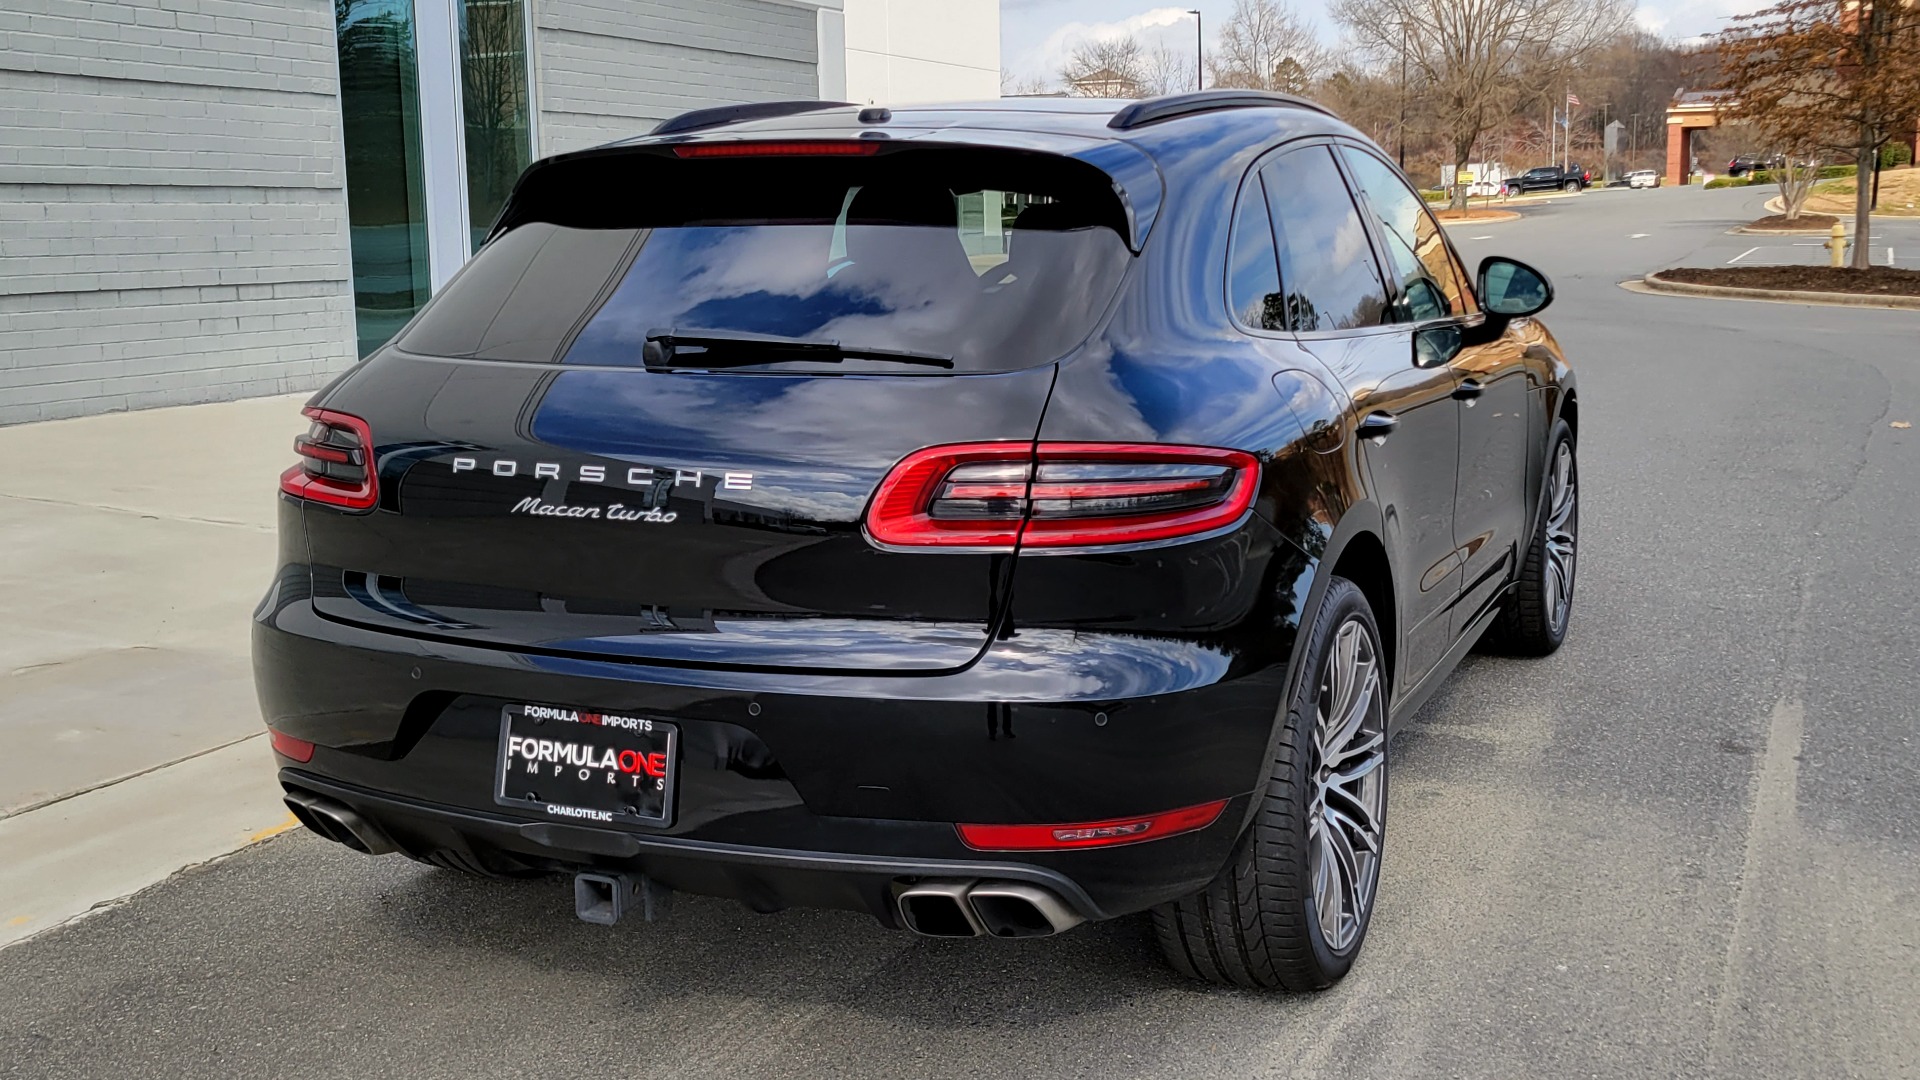 Used 2016 Porsche MACAN TURBO 3.6L PREMIUM / NAV / BOSE / SUNROOF / REARVIEW for sale Sold at Formula Imports in Charlotte NC 28227 8